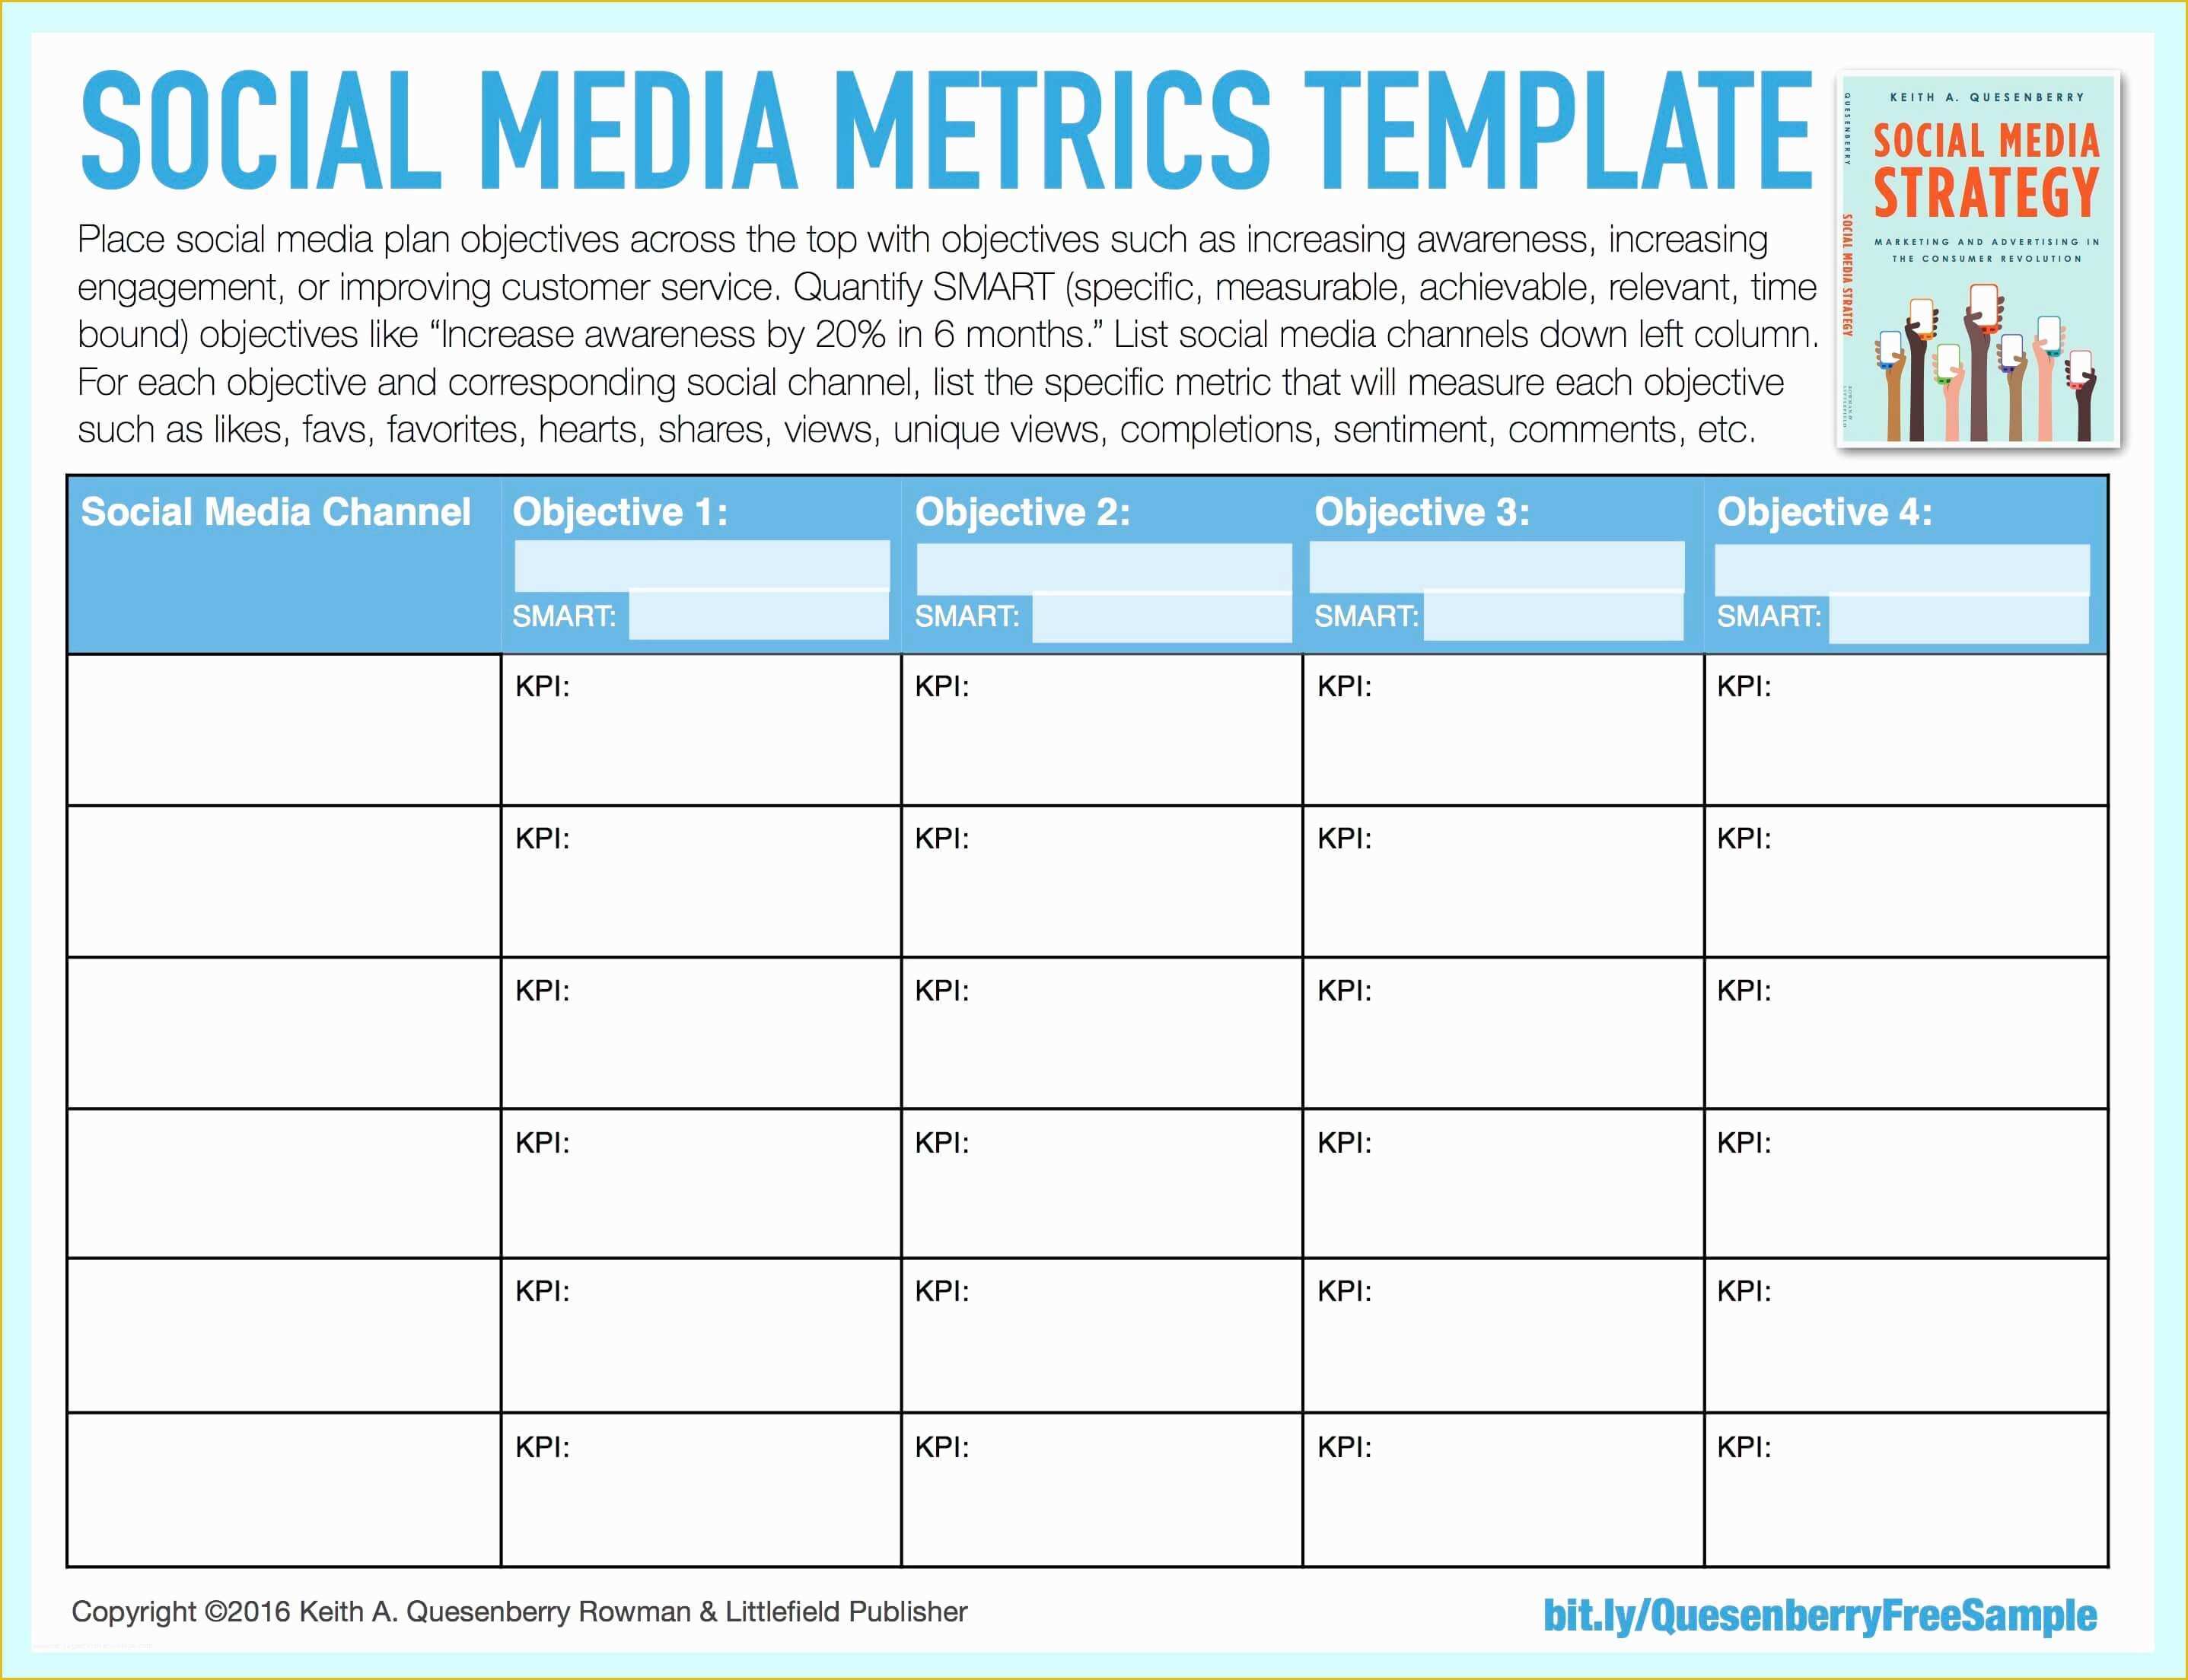 Social Media Marketing Proposal Template Free Of social Media Templates Keith A Quesenberry